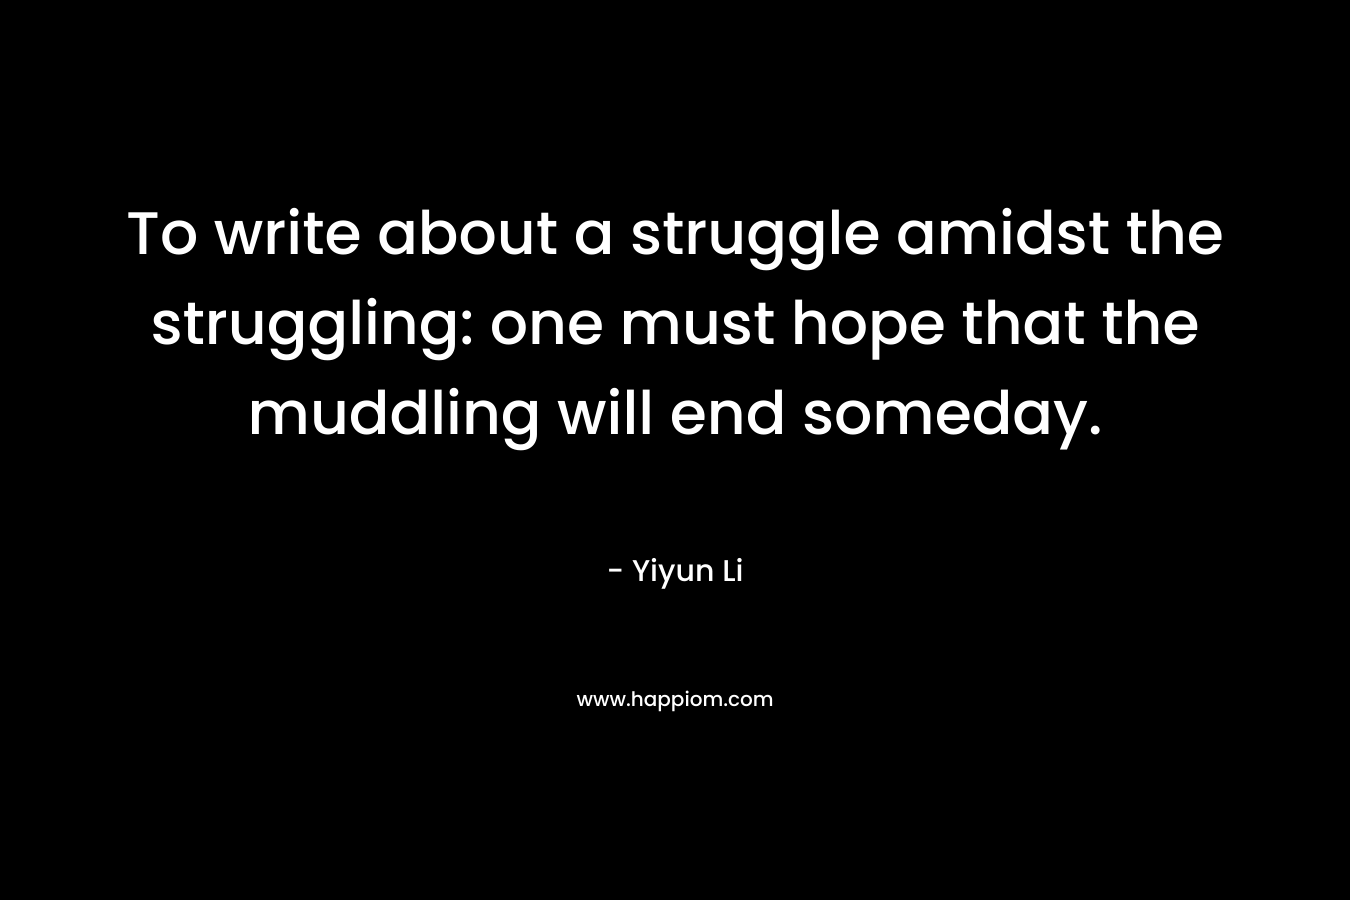 To write about a struggle amidst the struggling: one must hope that the muddling will end someday. – Yiyun Li